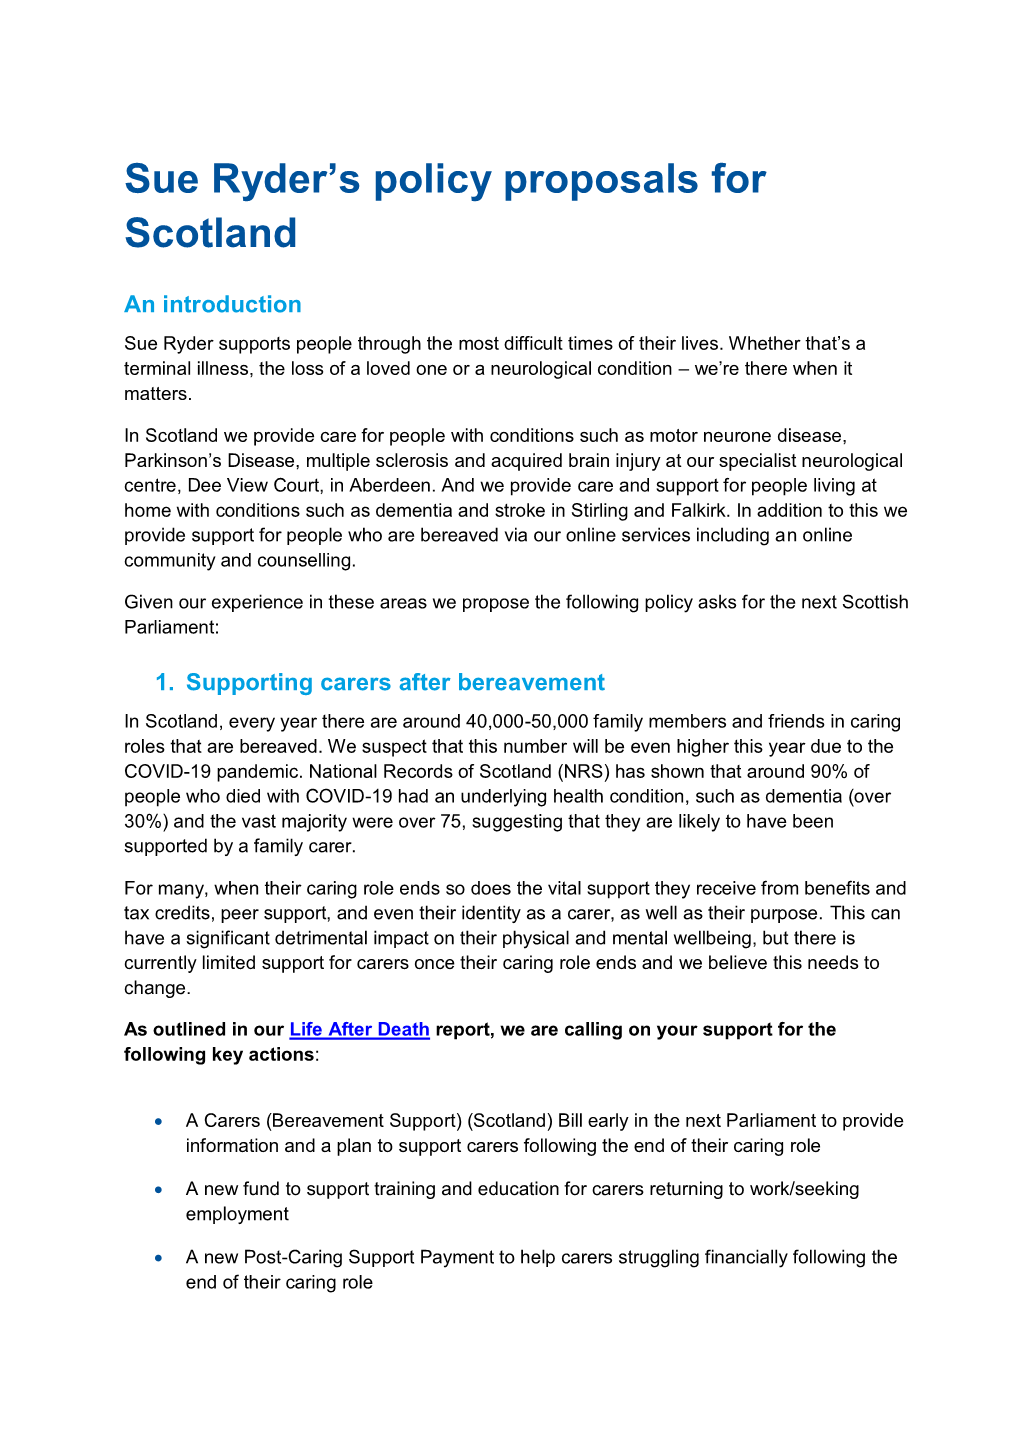 Sue Ryder's Policy Proposals for Scotland